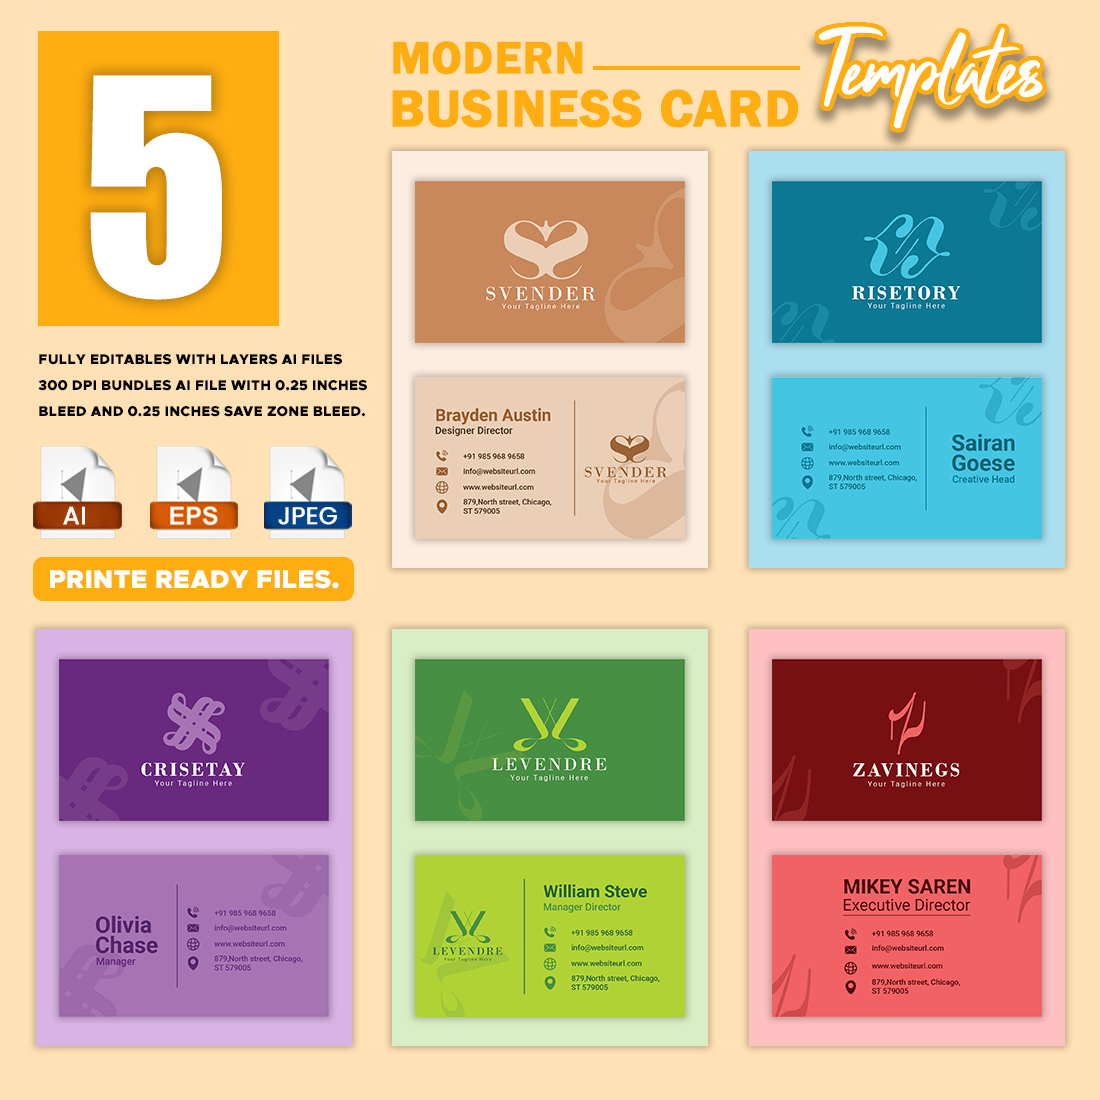 05 Creative/Modern Business Card Templates Bundle – Just $20 cover image.